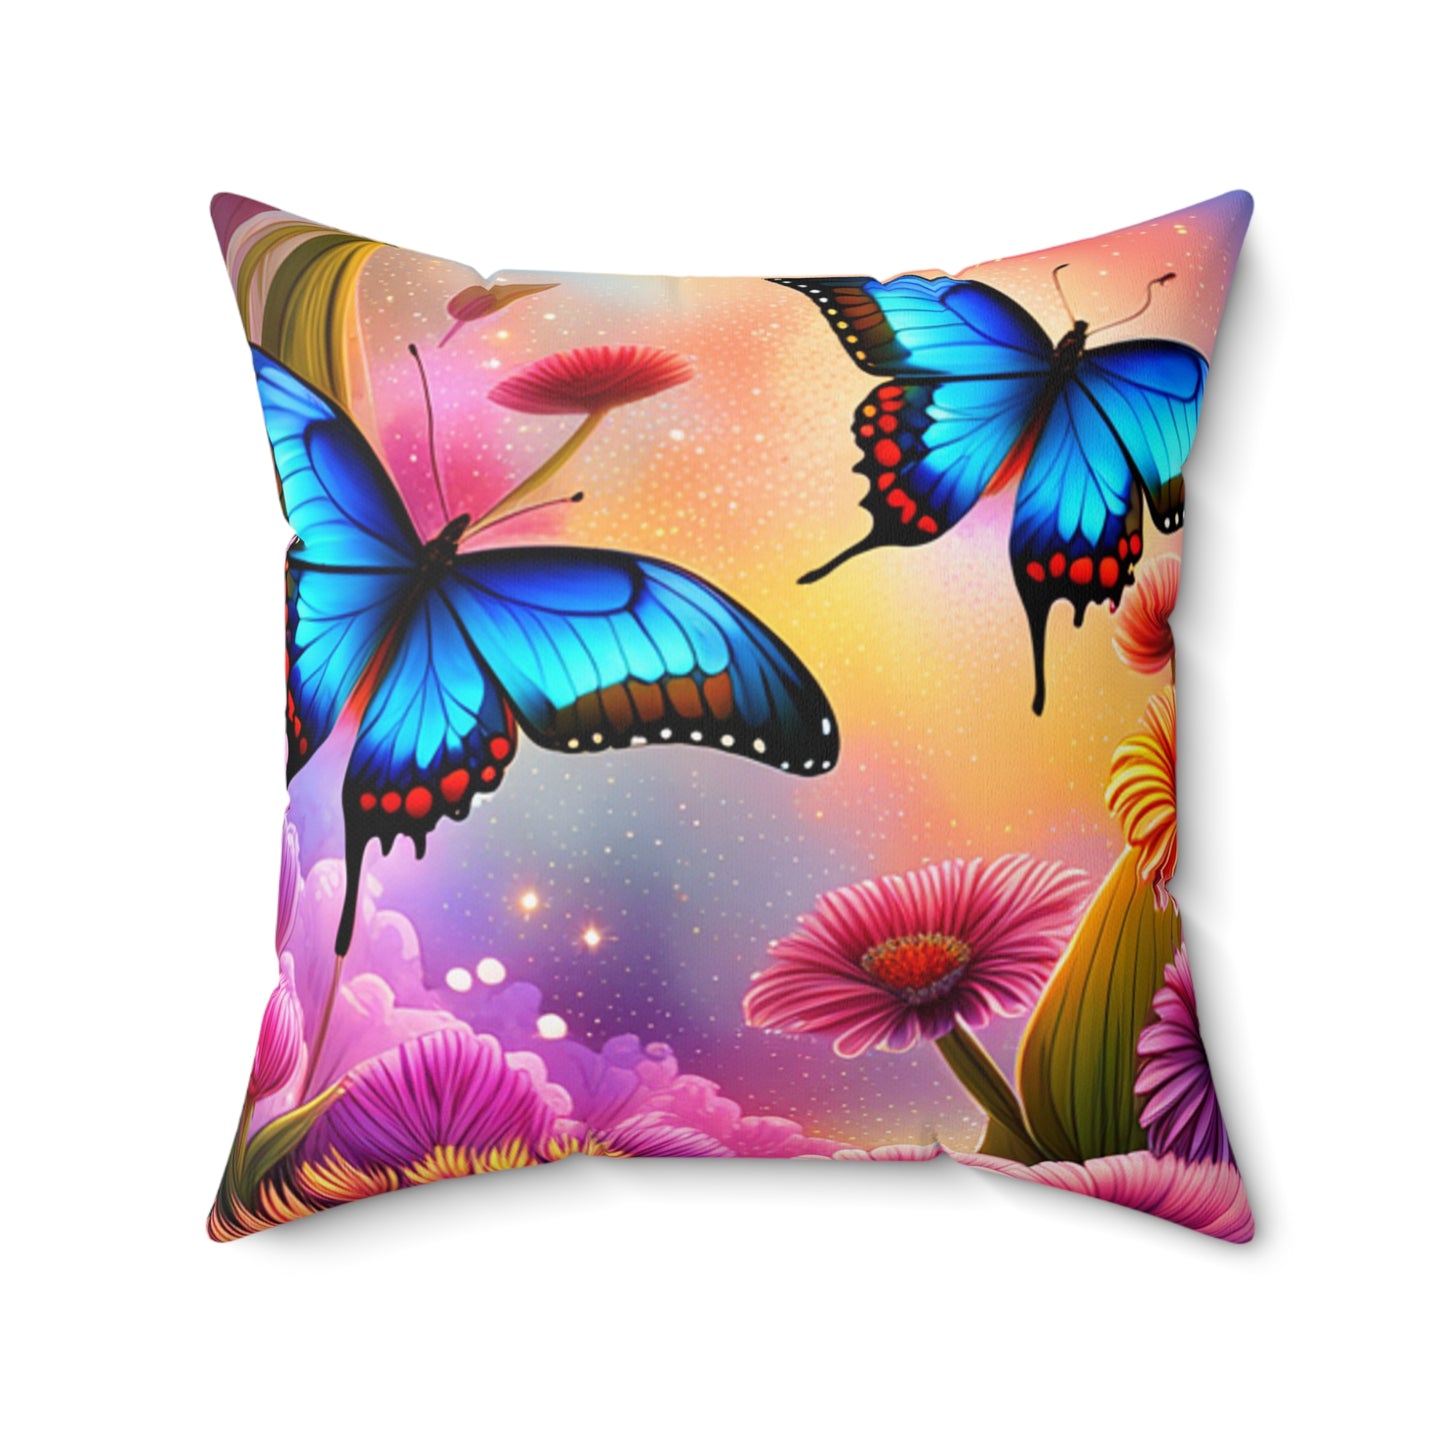 Blue Butterflies and Pink Flowers Spun Polyester Square Pillow, 4 Sizes to Choose From